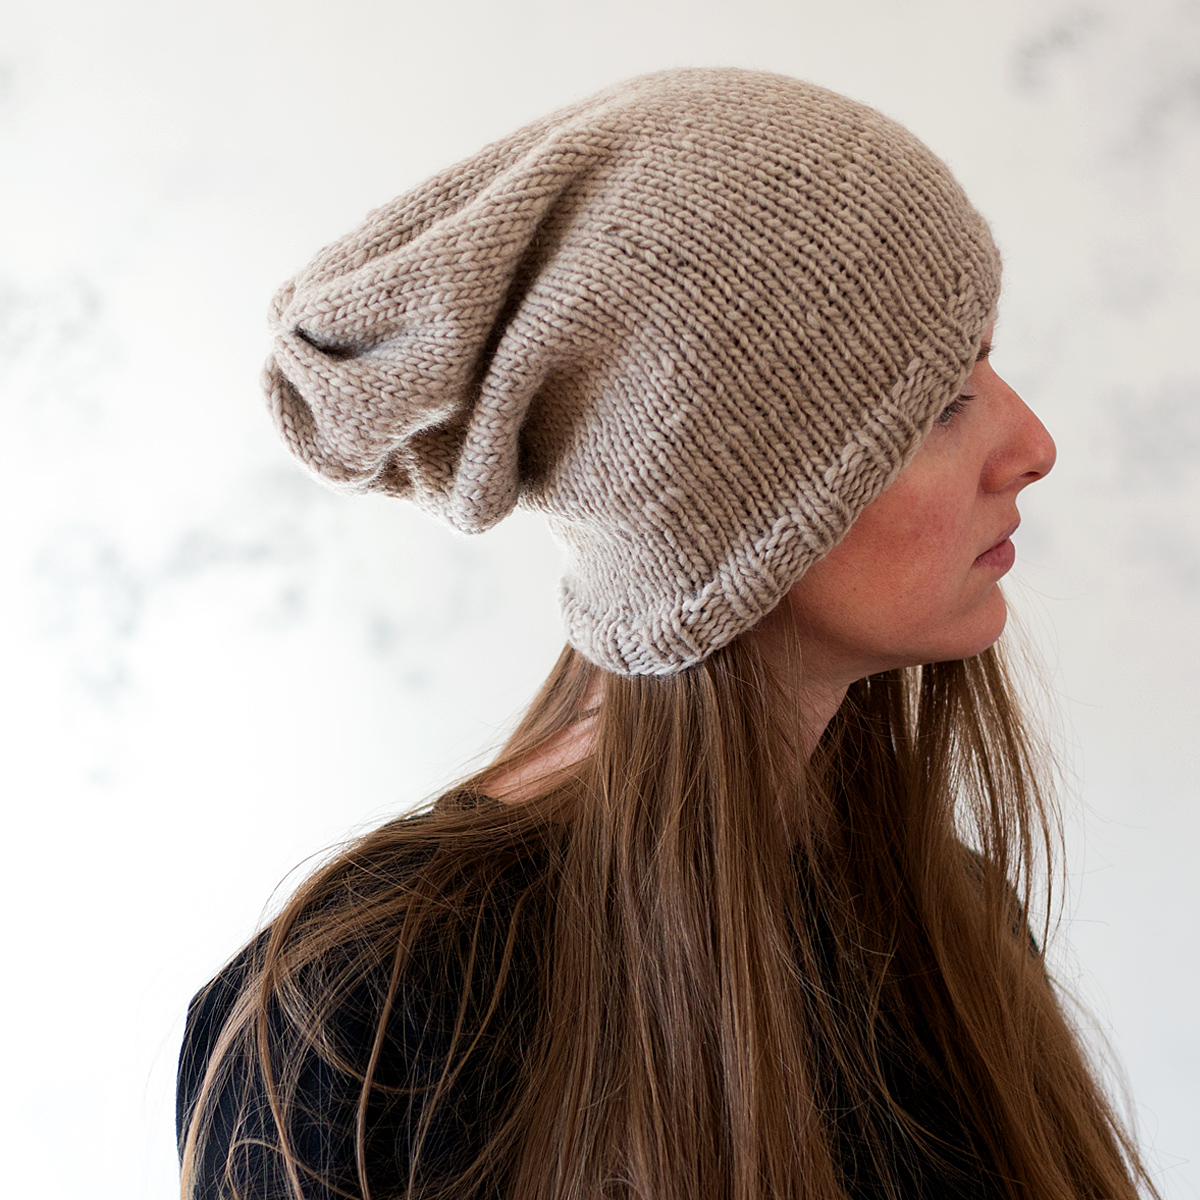 Knitted Slouchy Hat Pattern Inspirational Womens Slouchy Hat Knitting Pattern